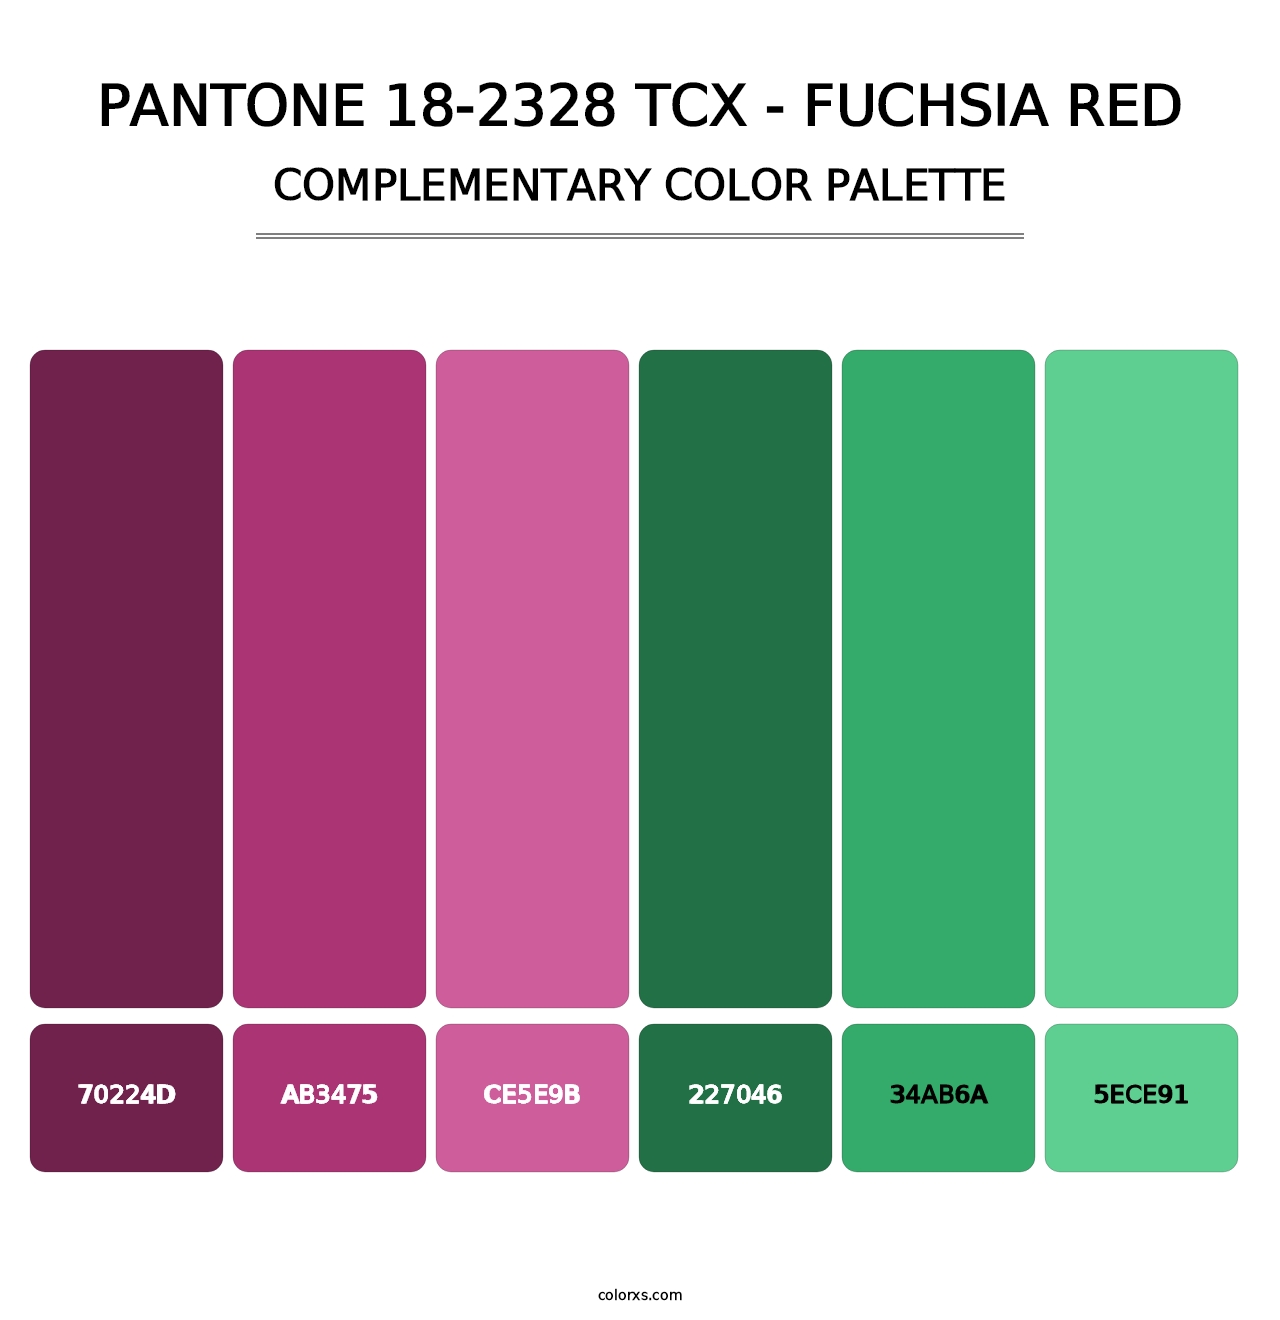 PANTONE 18-2328 TCX - Fuchsia Red - Complementary Color Palette